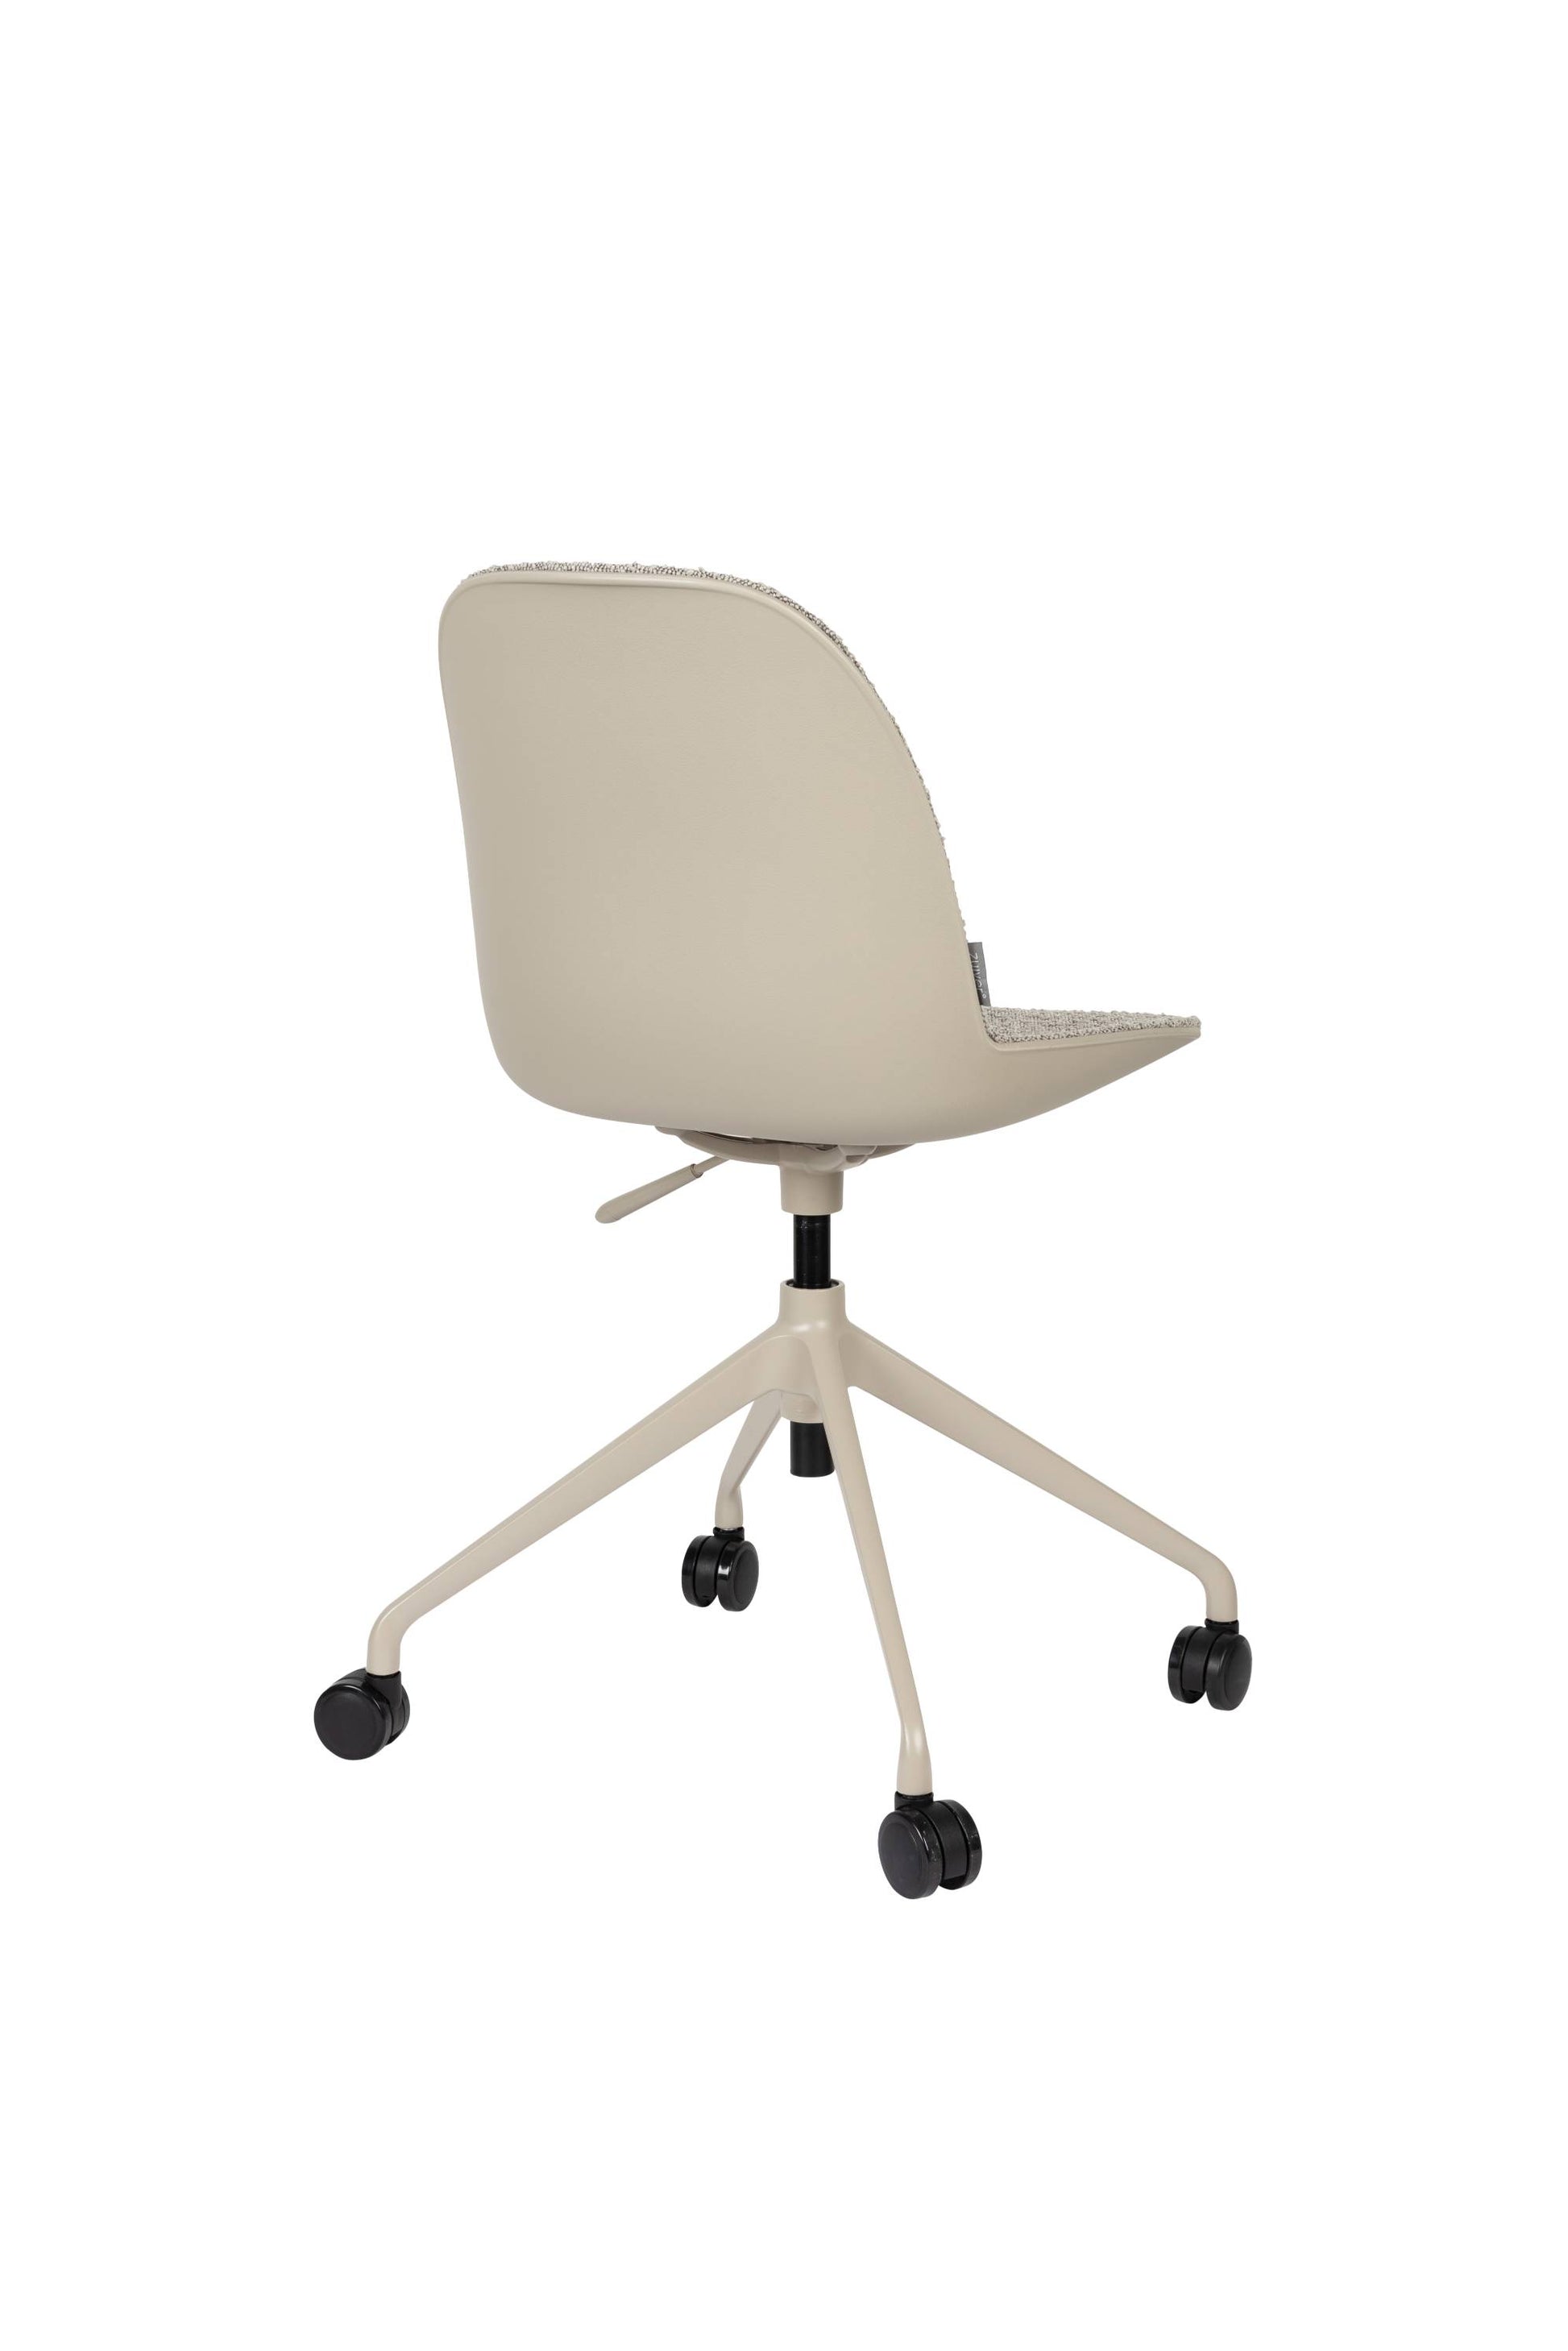 Zuiver | OFFICE CHAIR ALBERT KUIP TAUPE Default Title